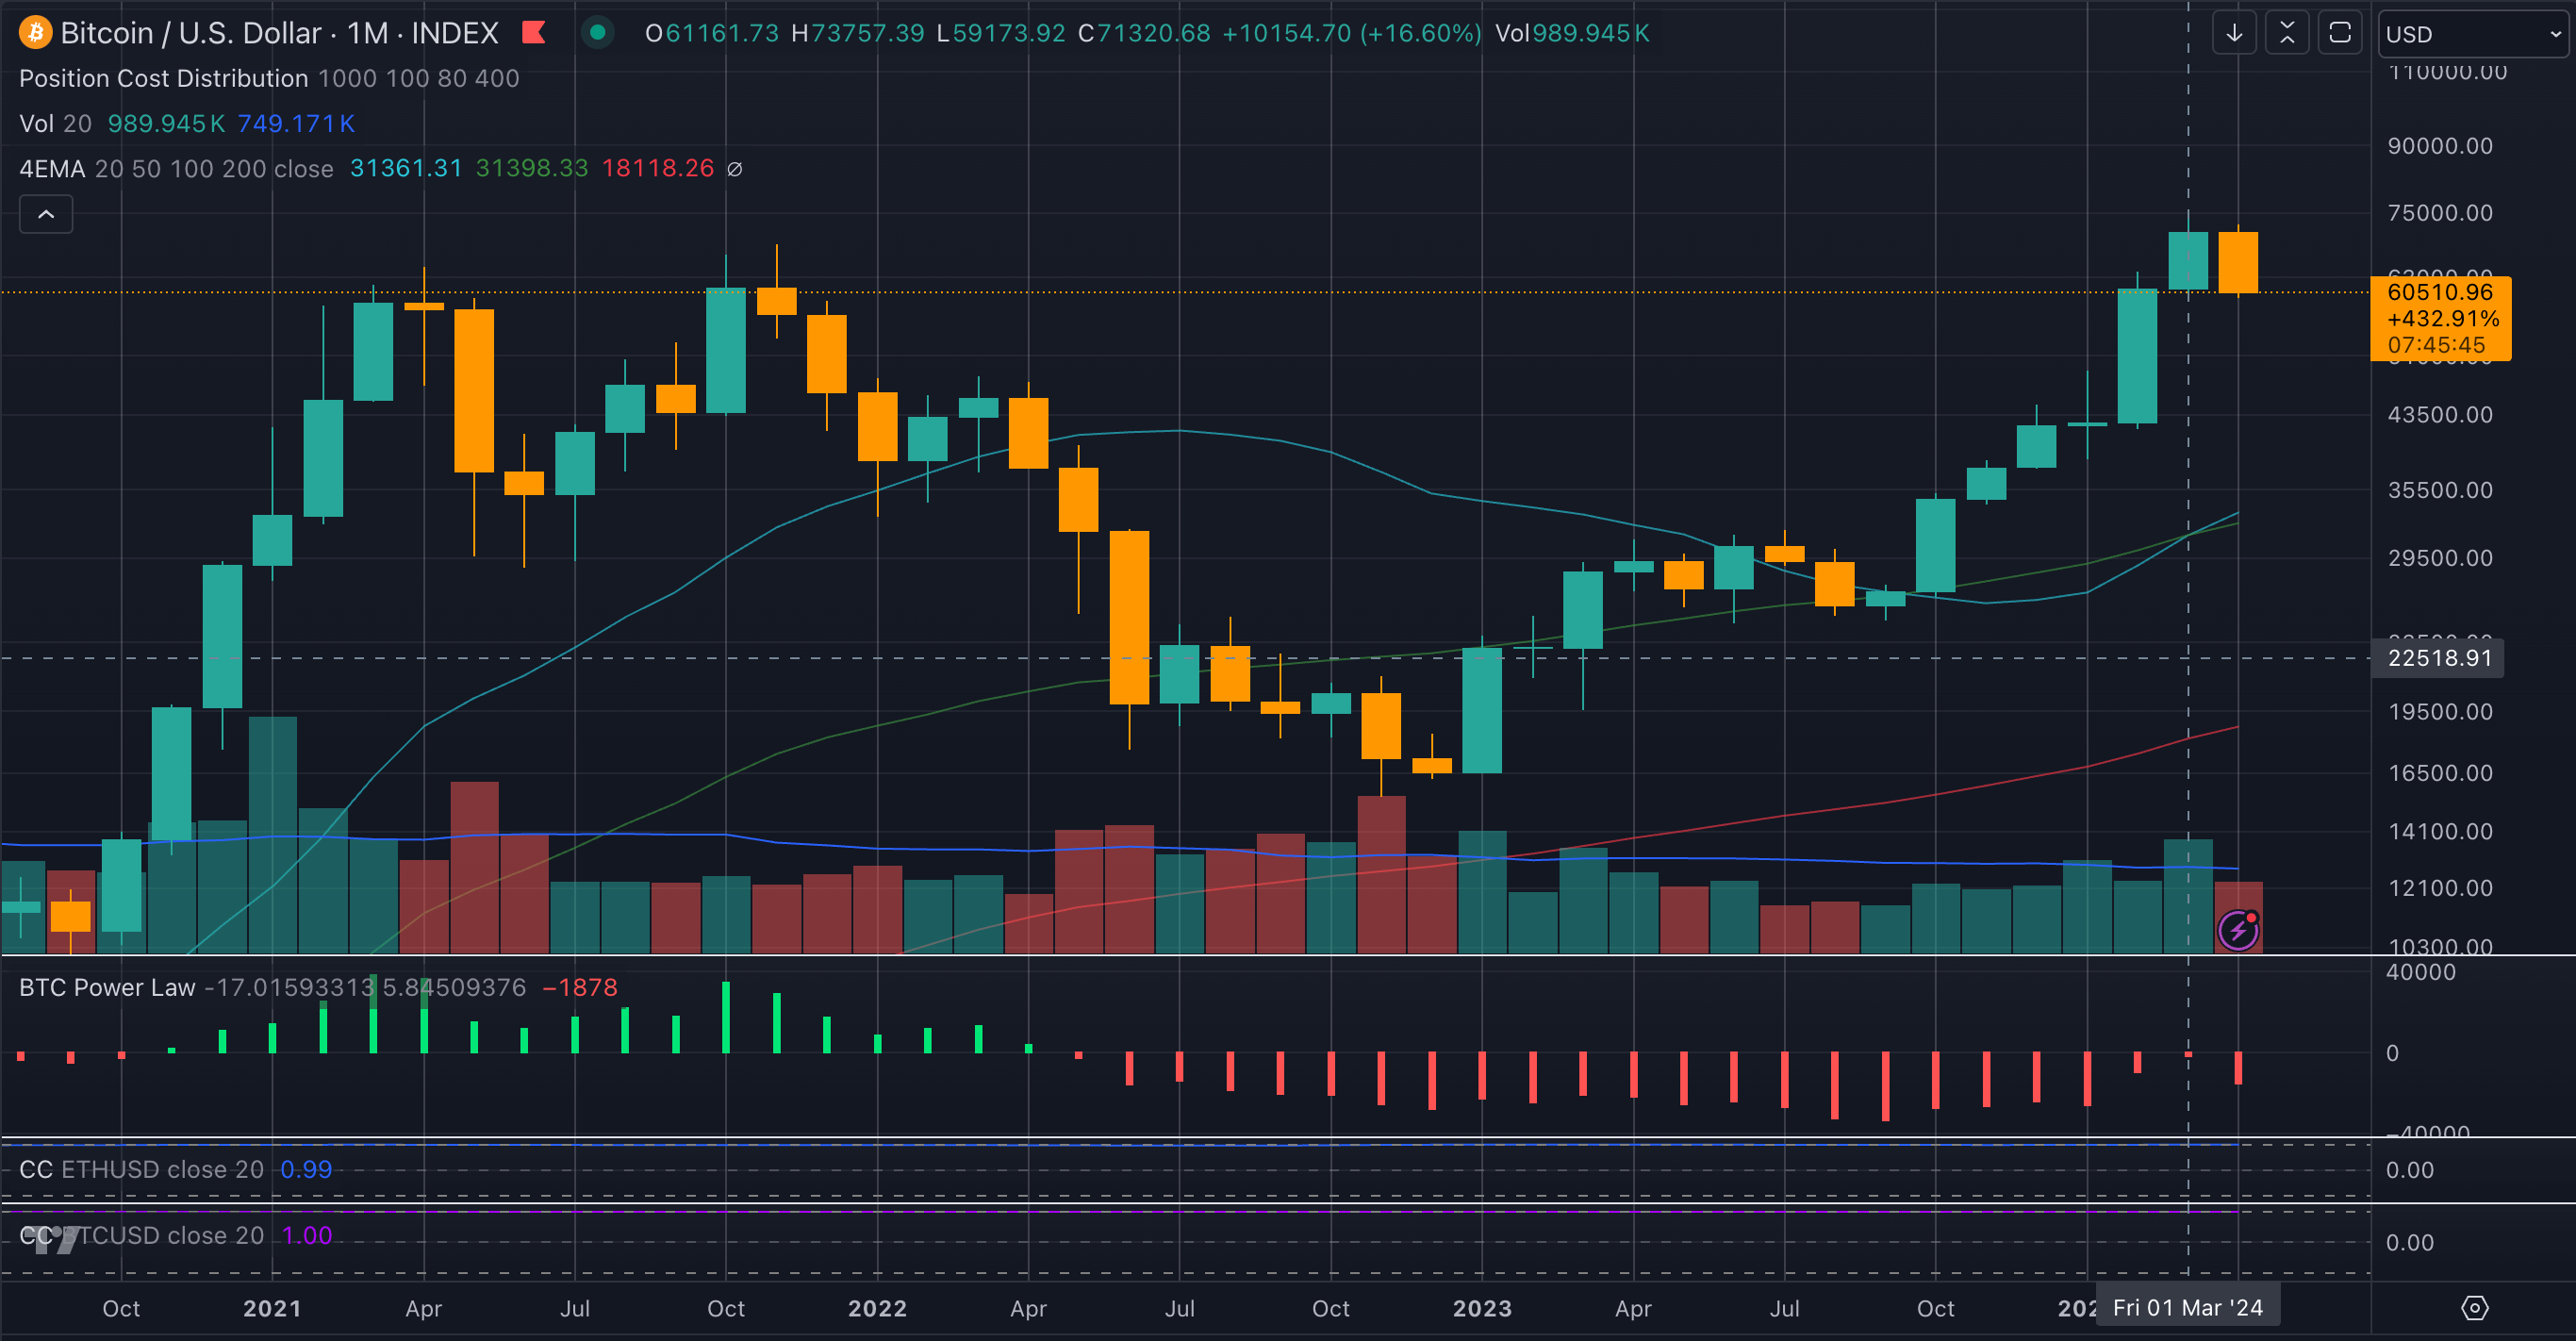 Bitcoin monthly candlesticks from 2021 onwards (TradingView)